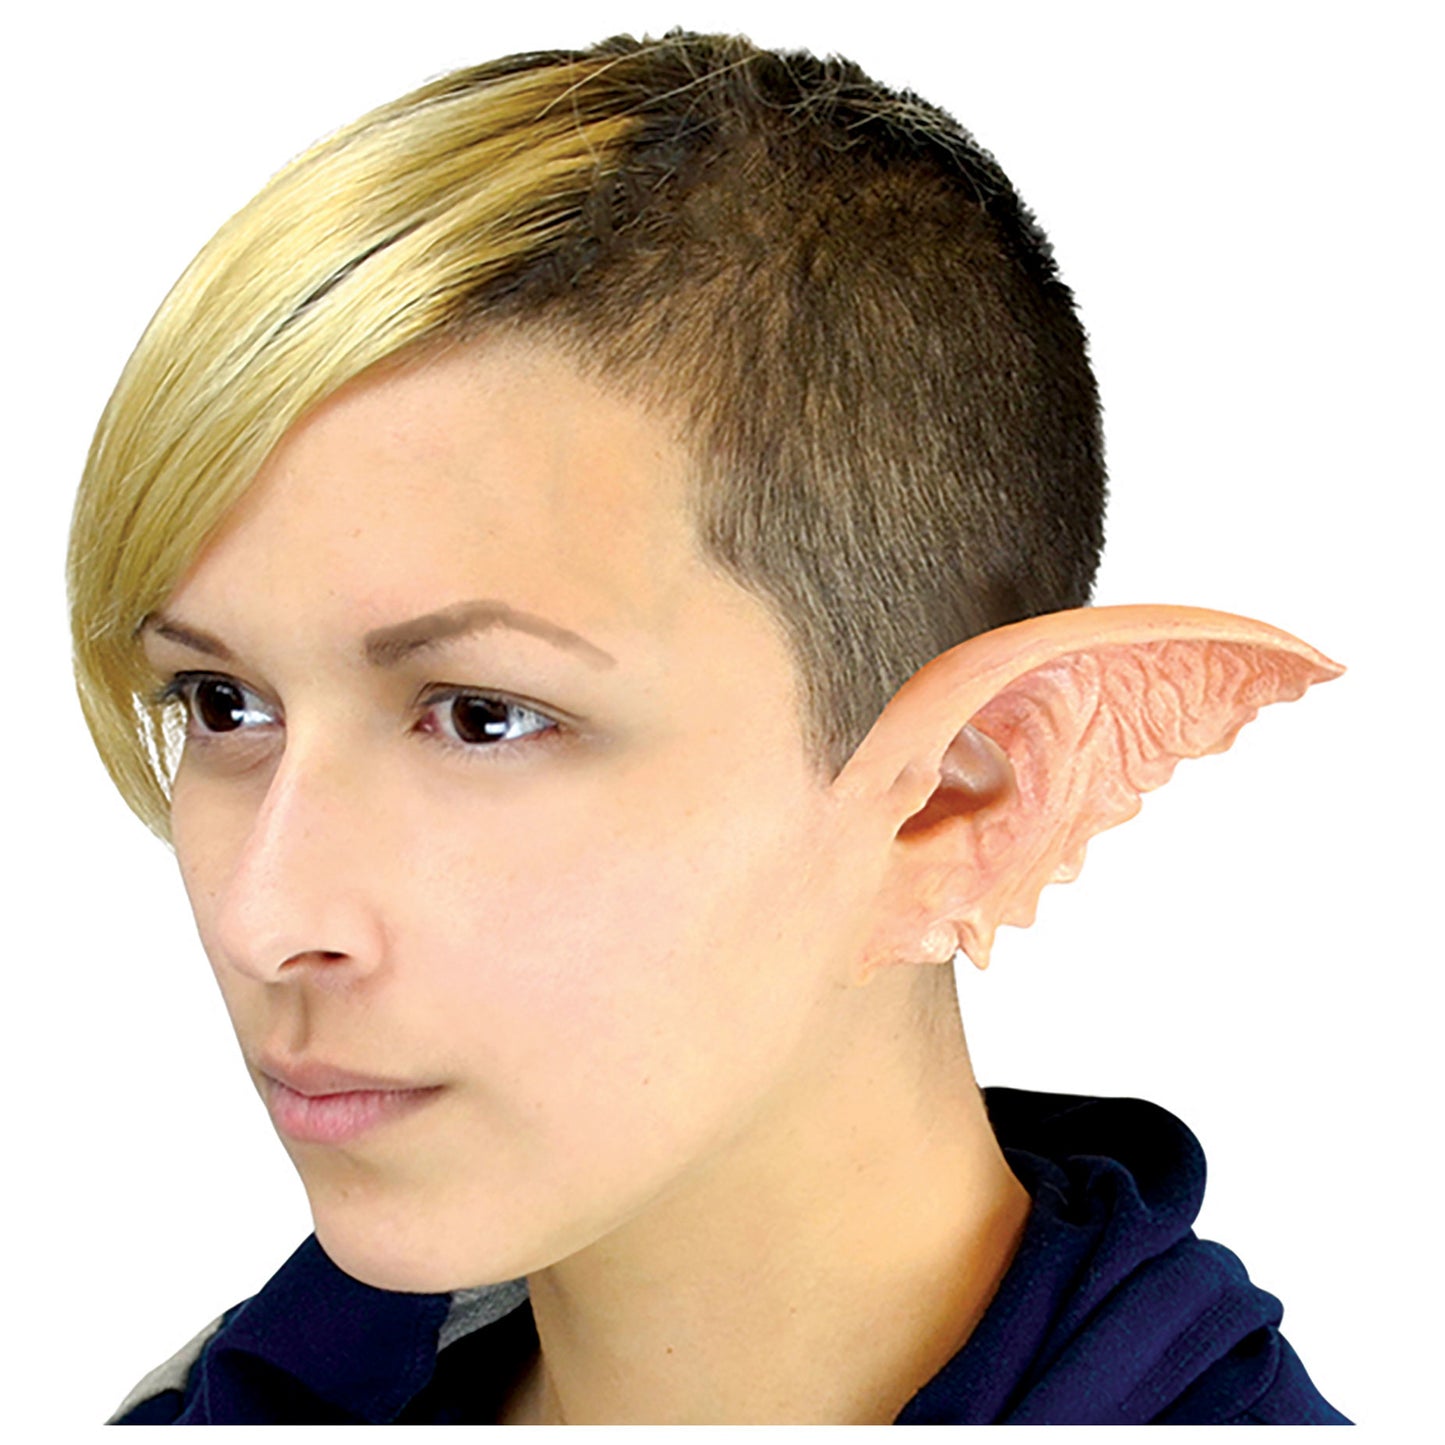 Gremlin Ears Woochie Professional Latex Special FX appliance Halloween Makeup